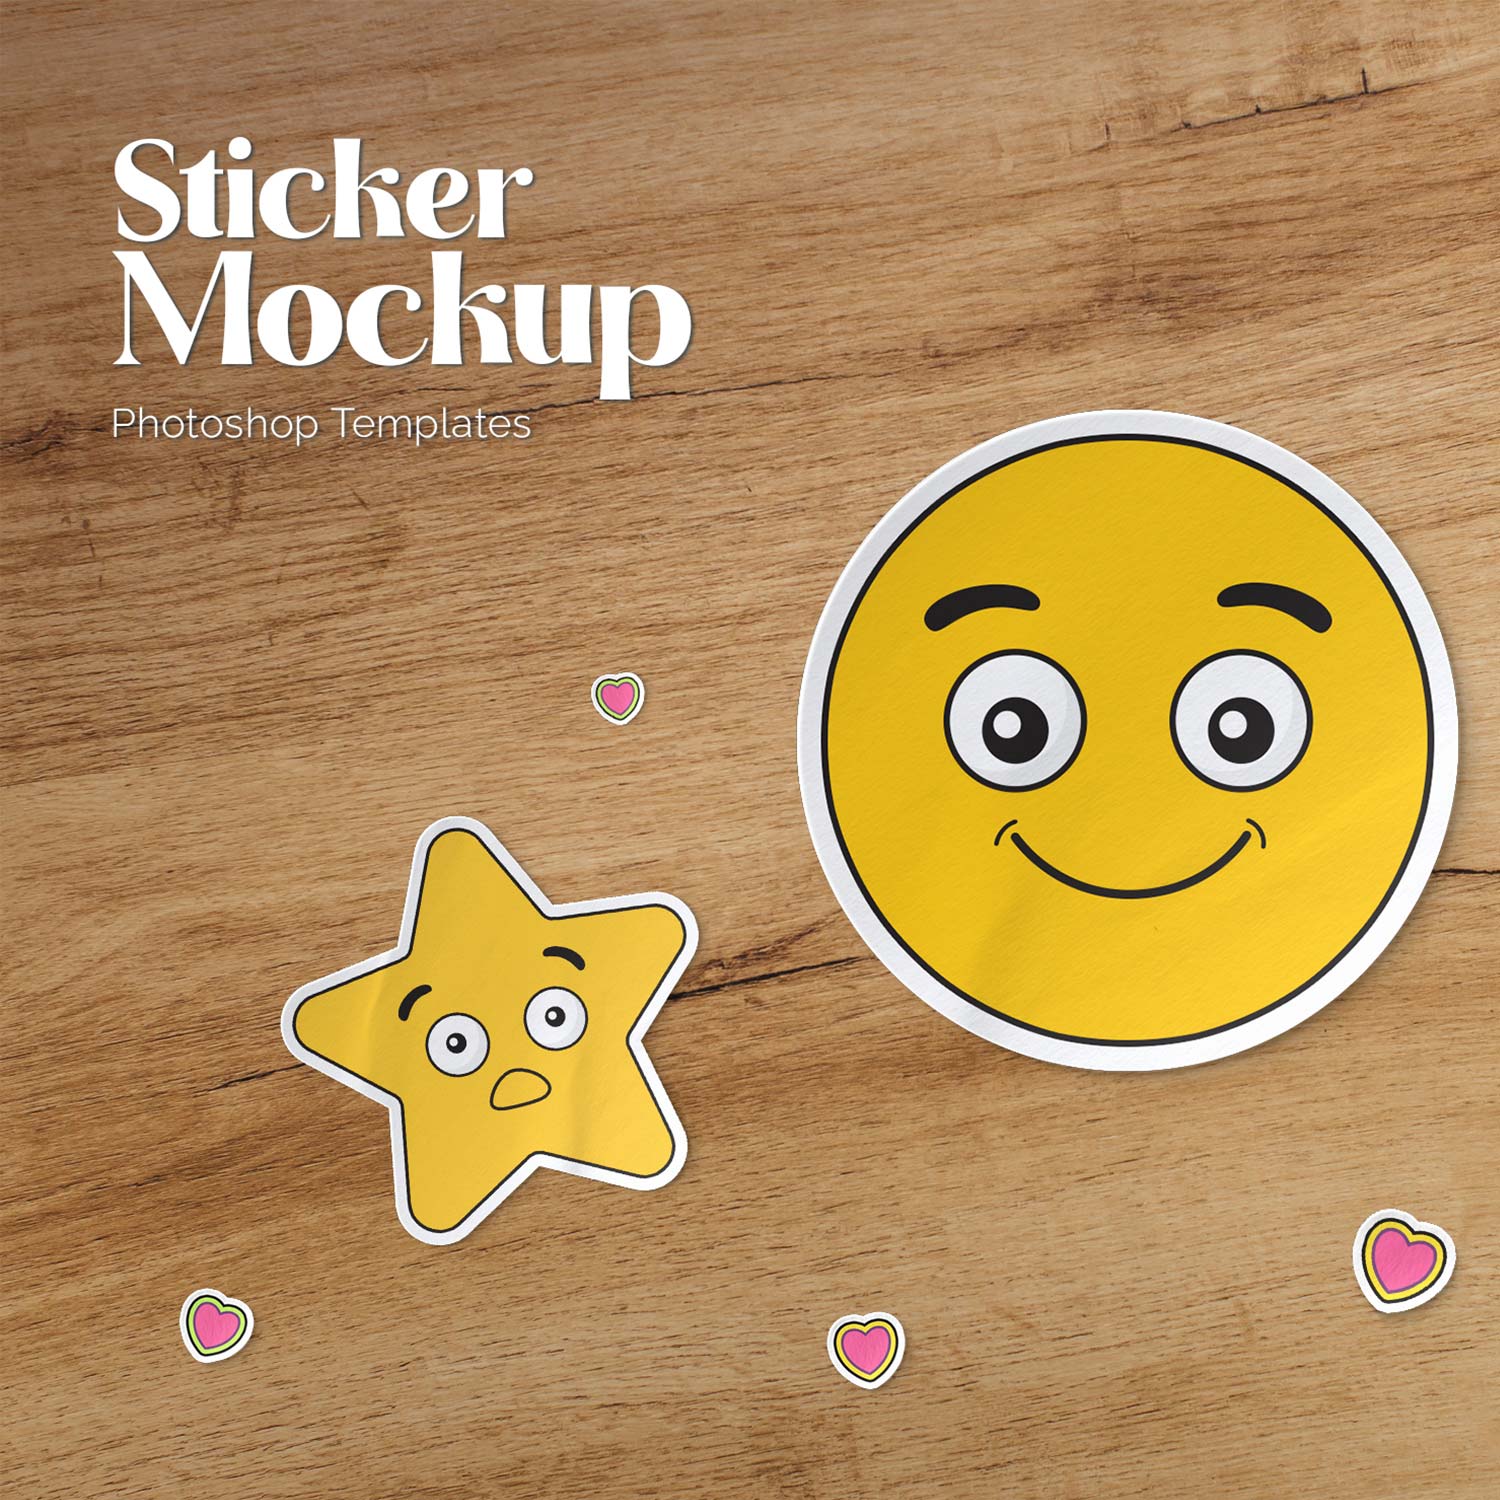 Sticker Mockup preview image.